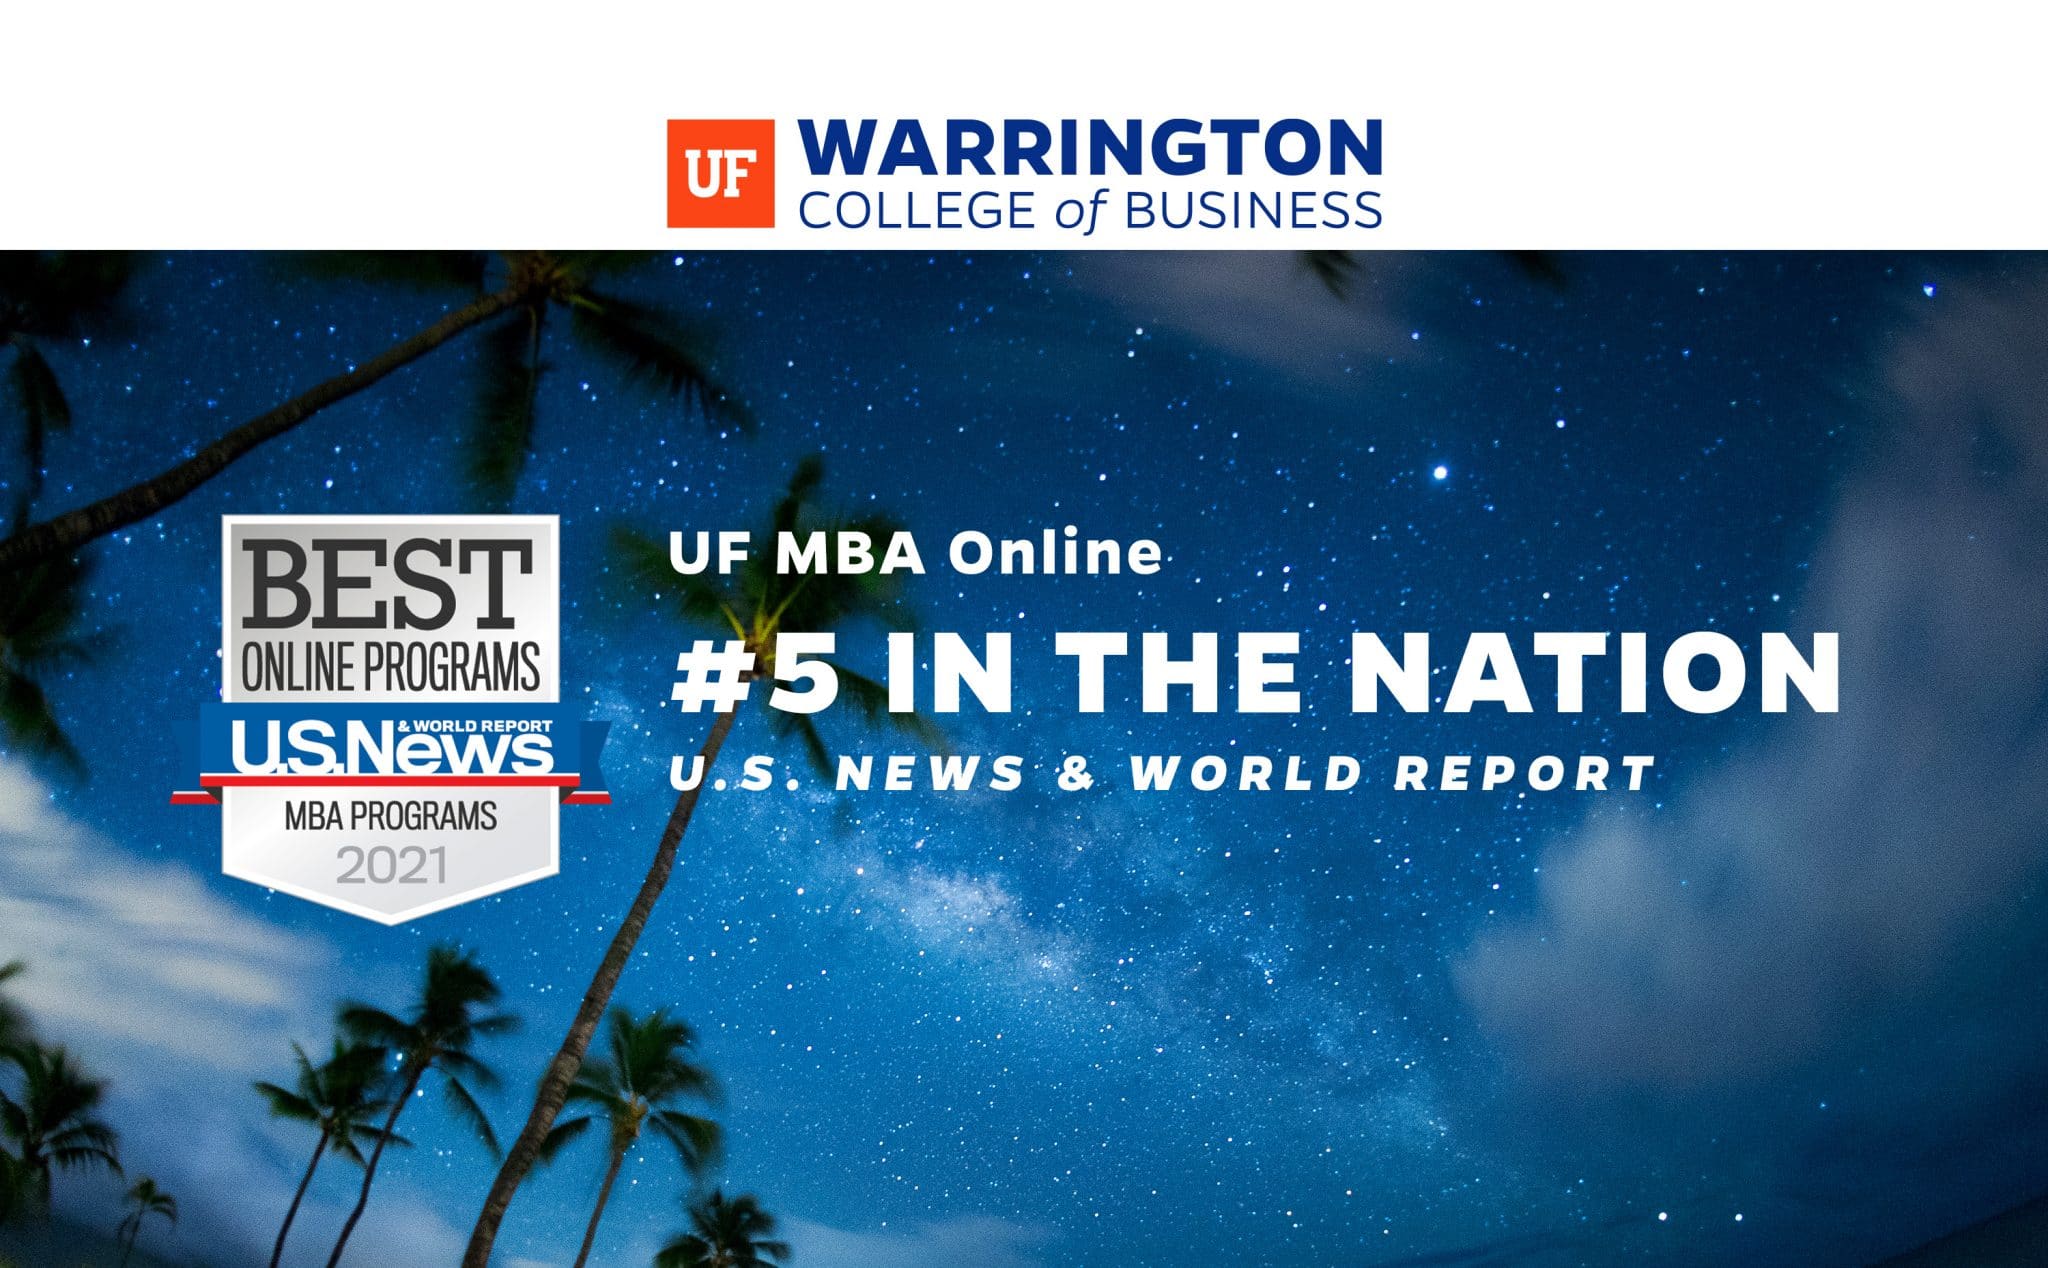 UF MBA continues to command top online MBA programs on US News & World